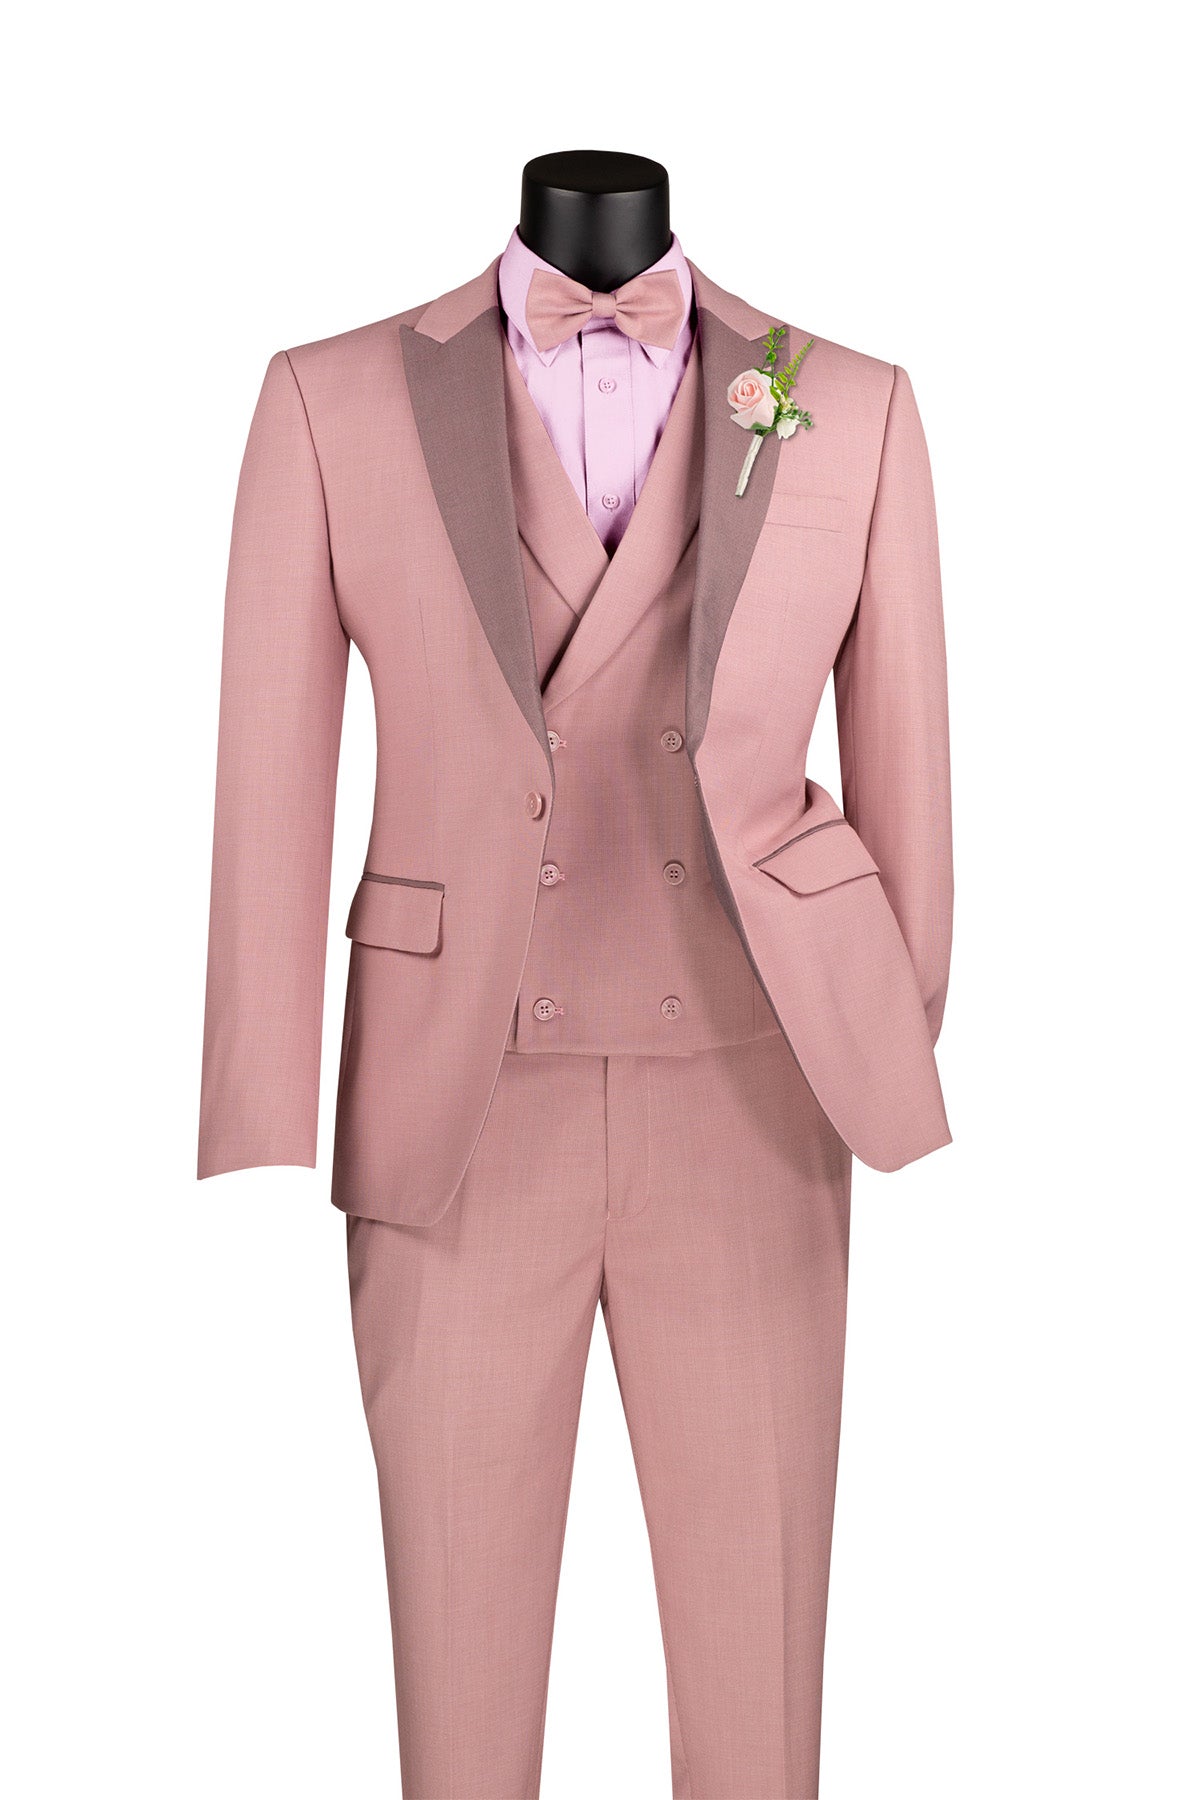 Slim Fit Tuxedo 3 Piece with Matching Bow Tie in Mauve